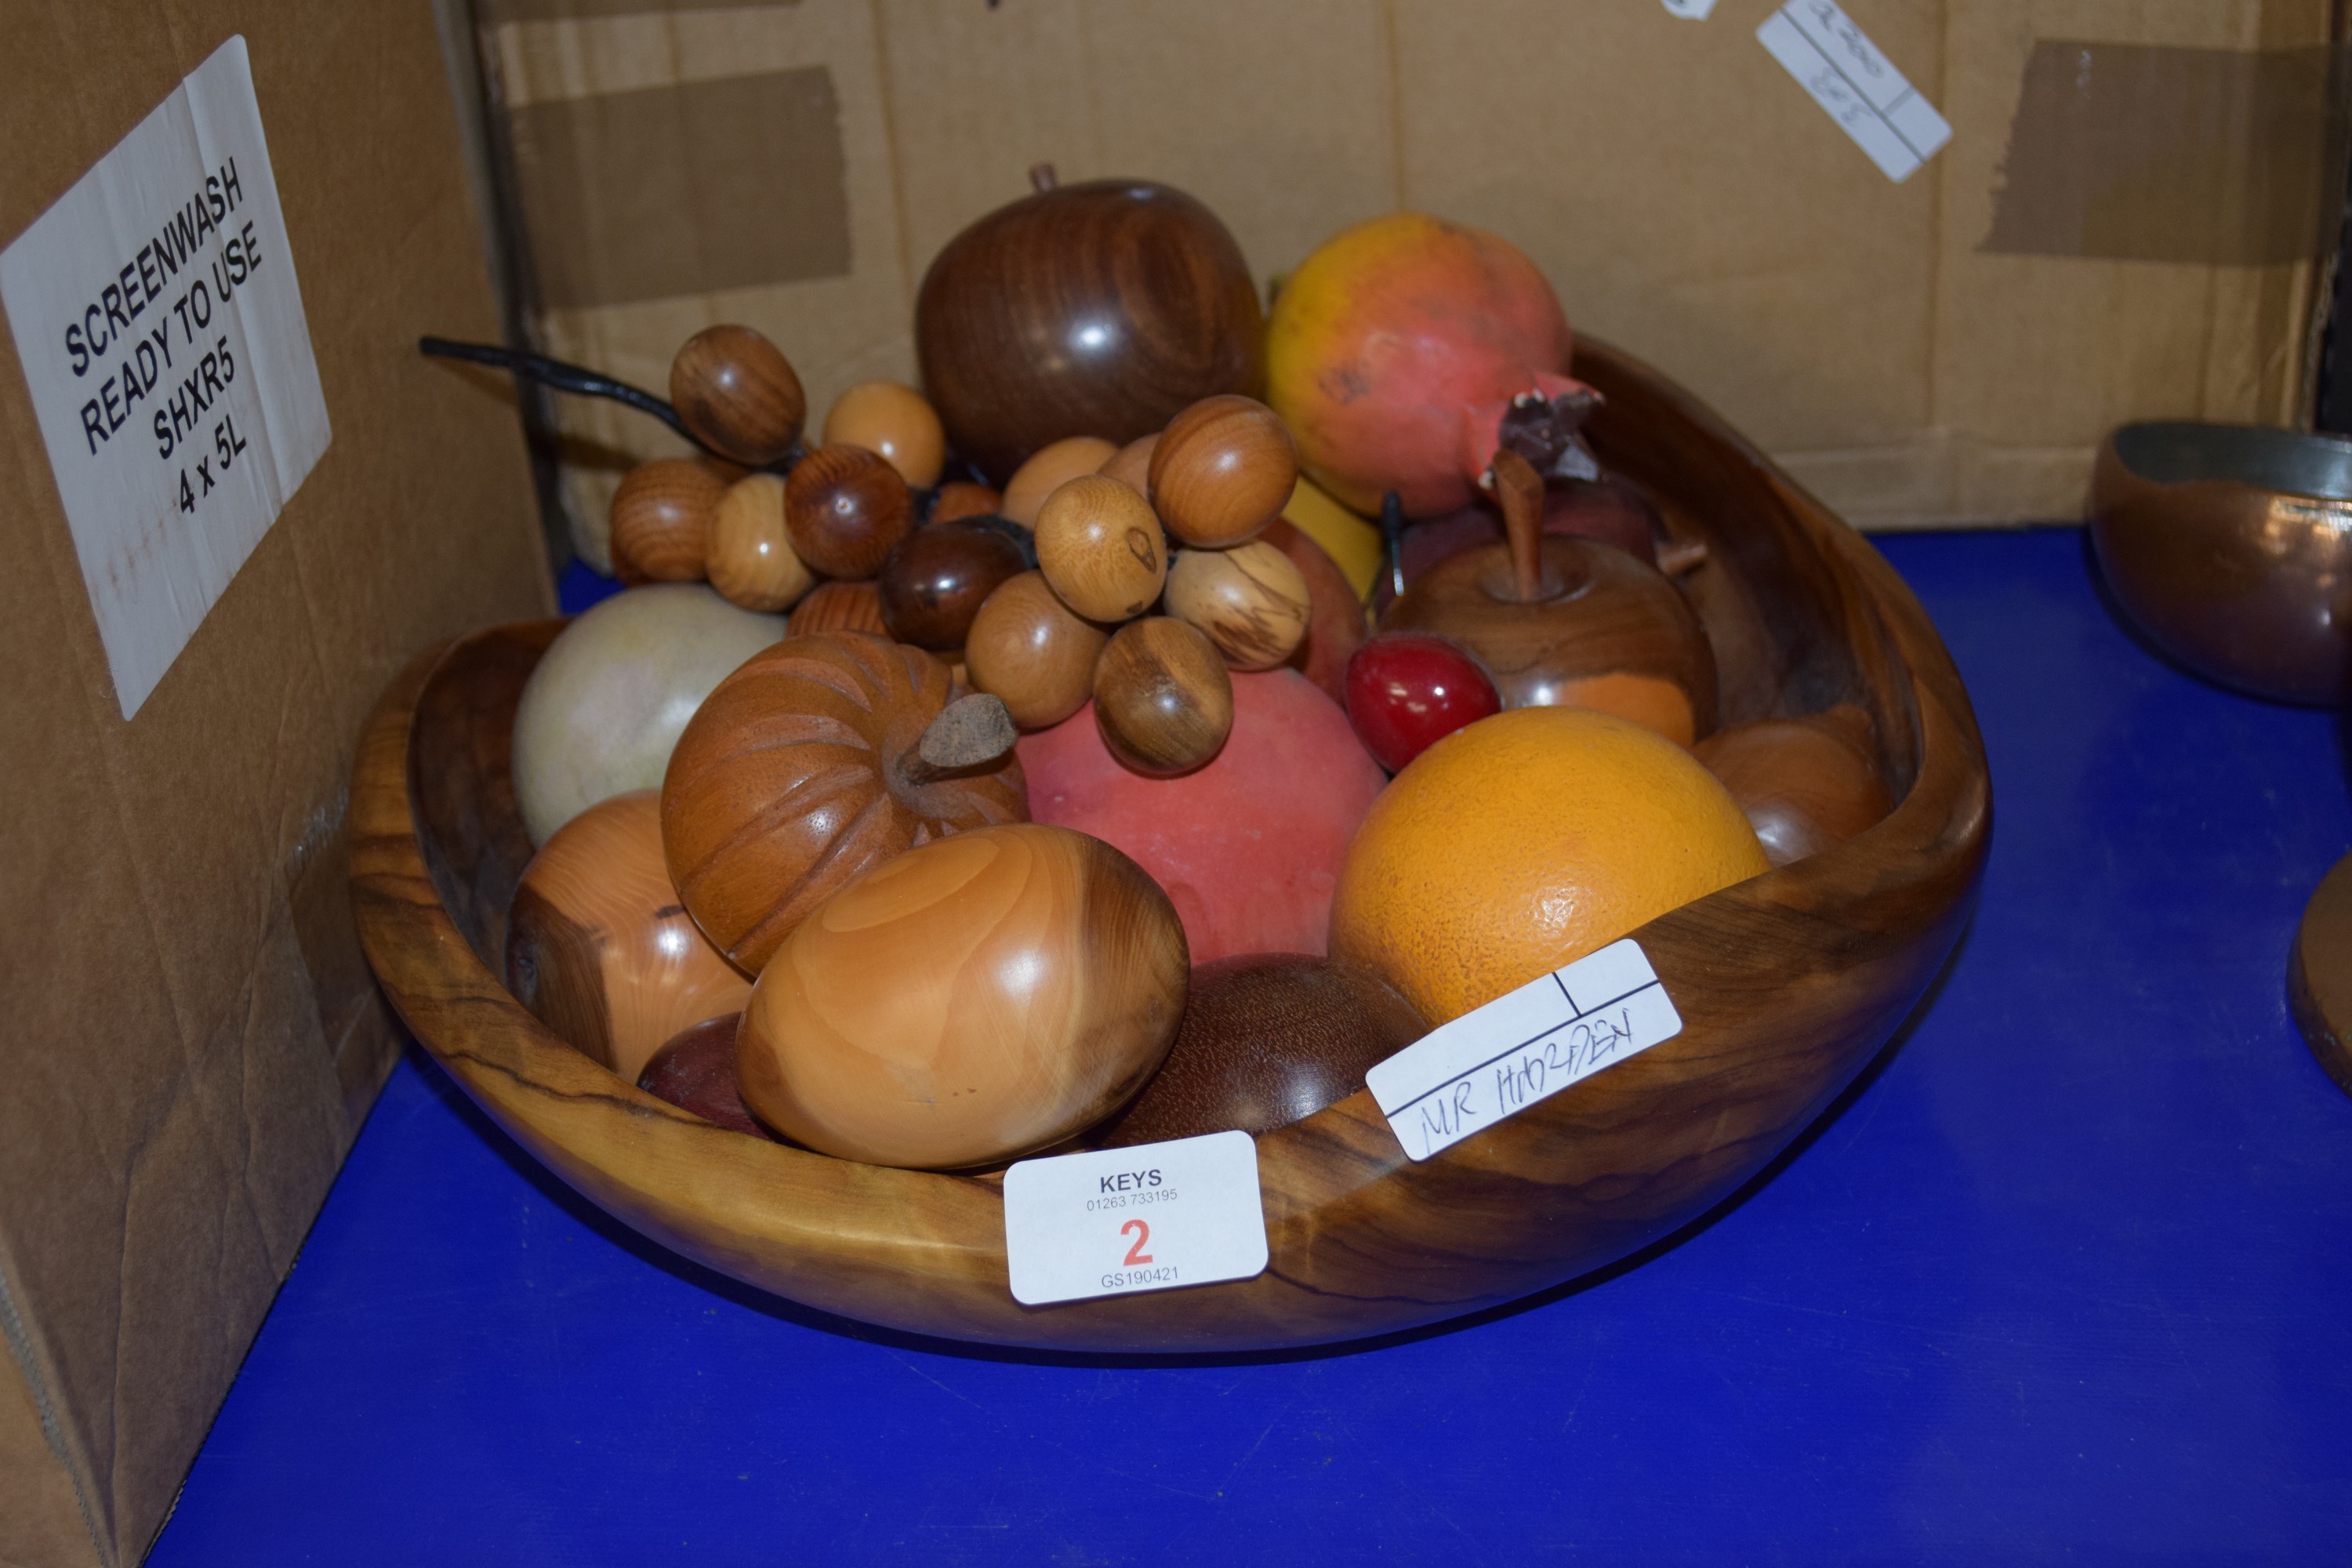 WOODEN FRUIT BOWL CONTAINING WOODEN CARVED FRUIT, APPLES, GRAPES ETC